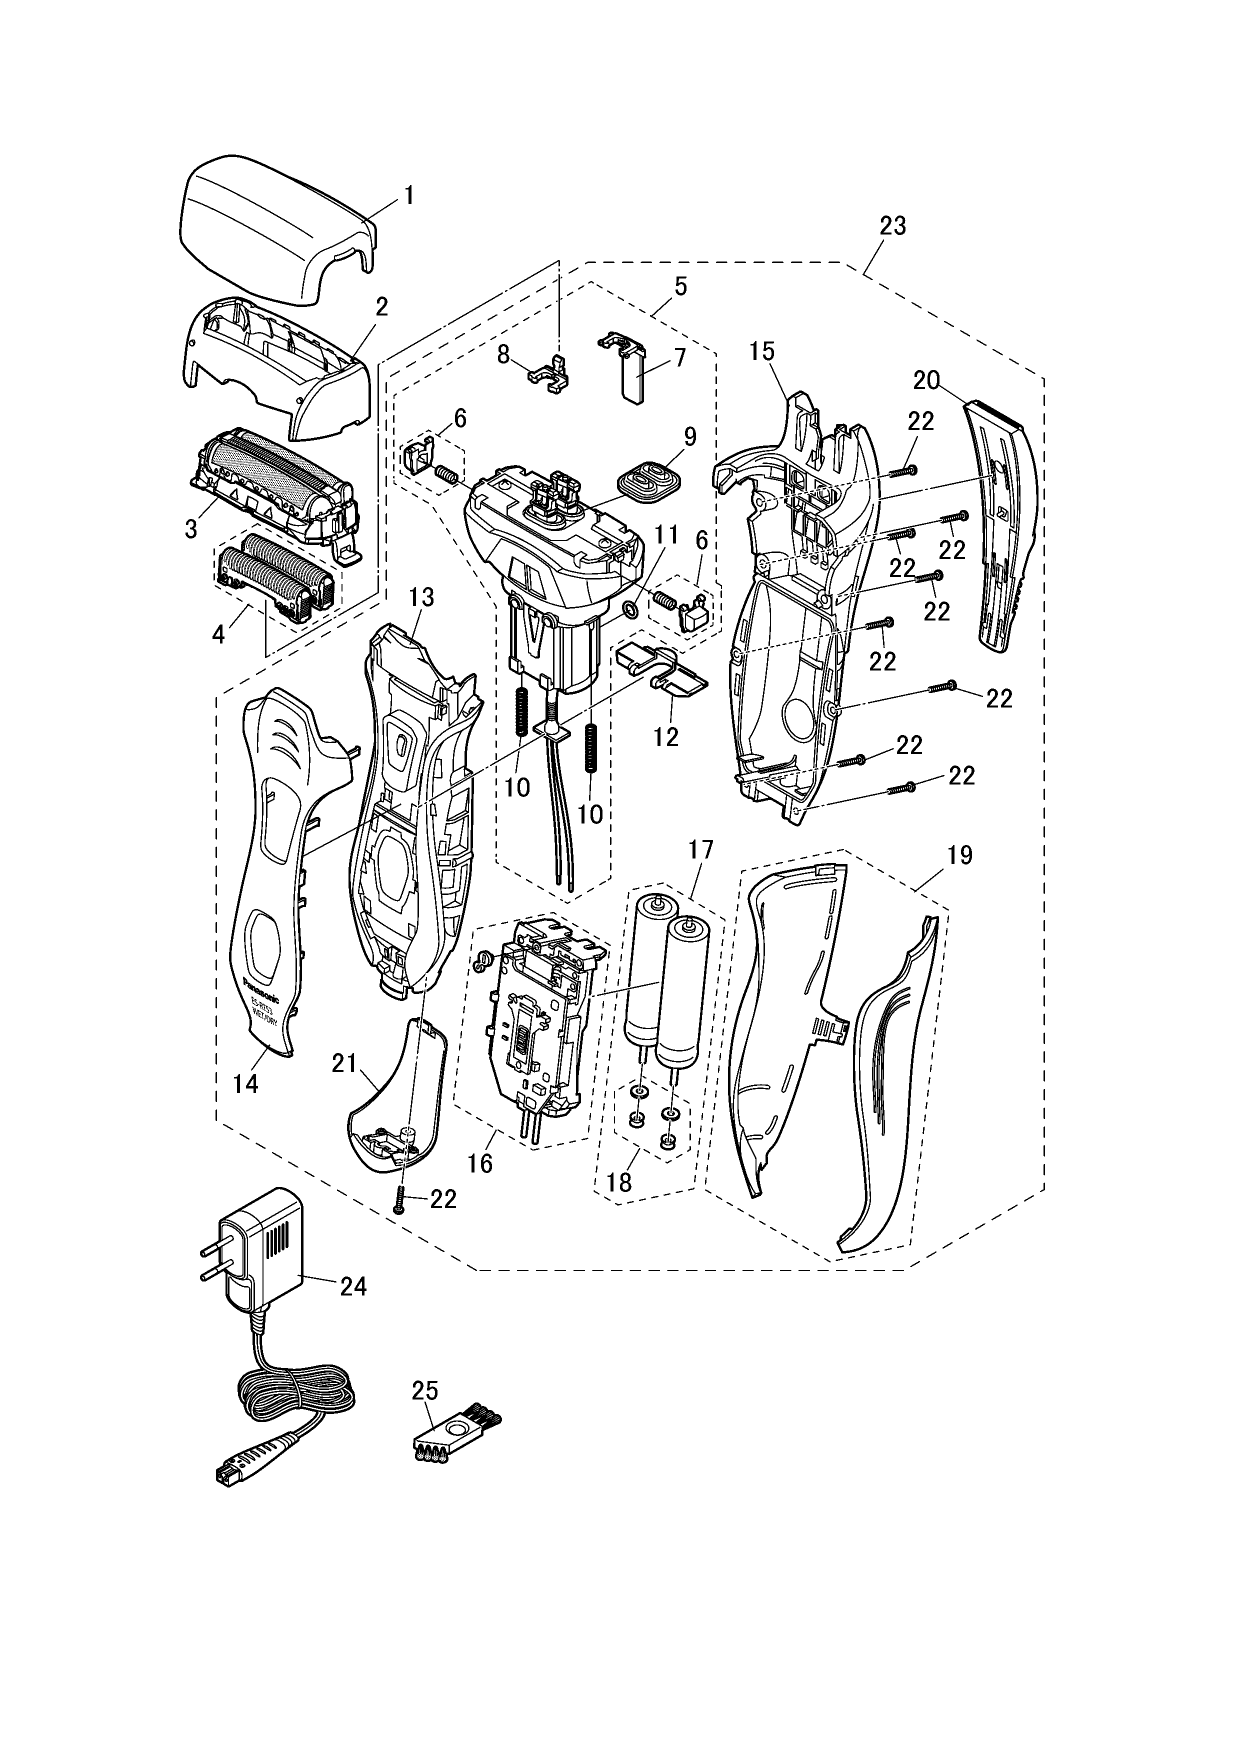 ES-RT33: Exploded View